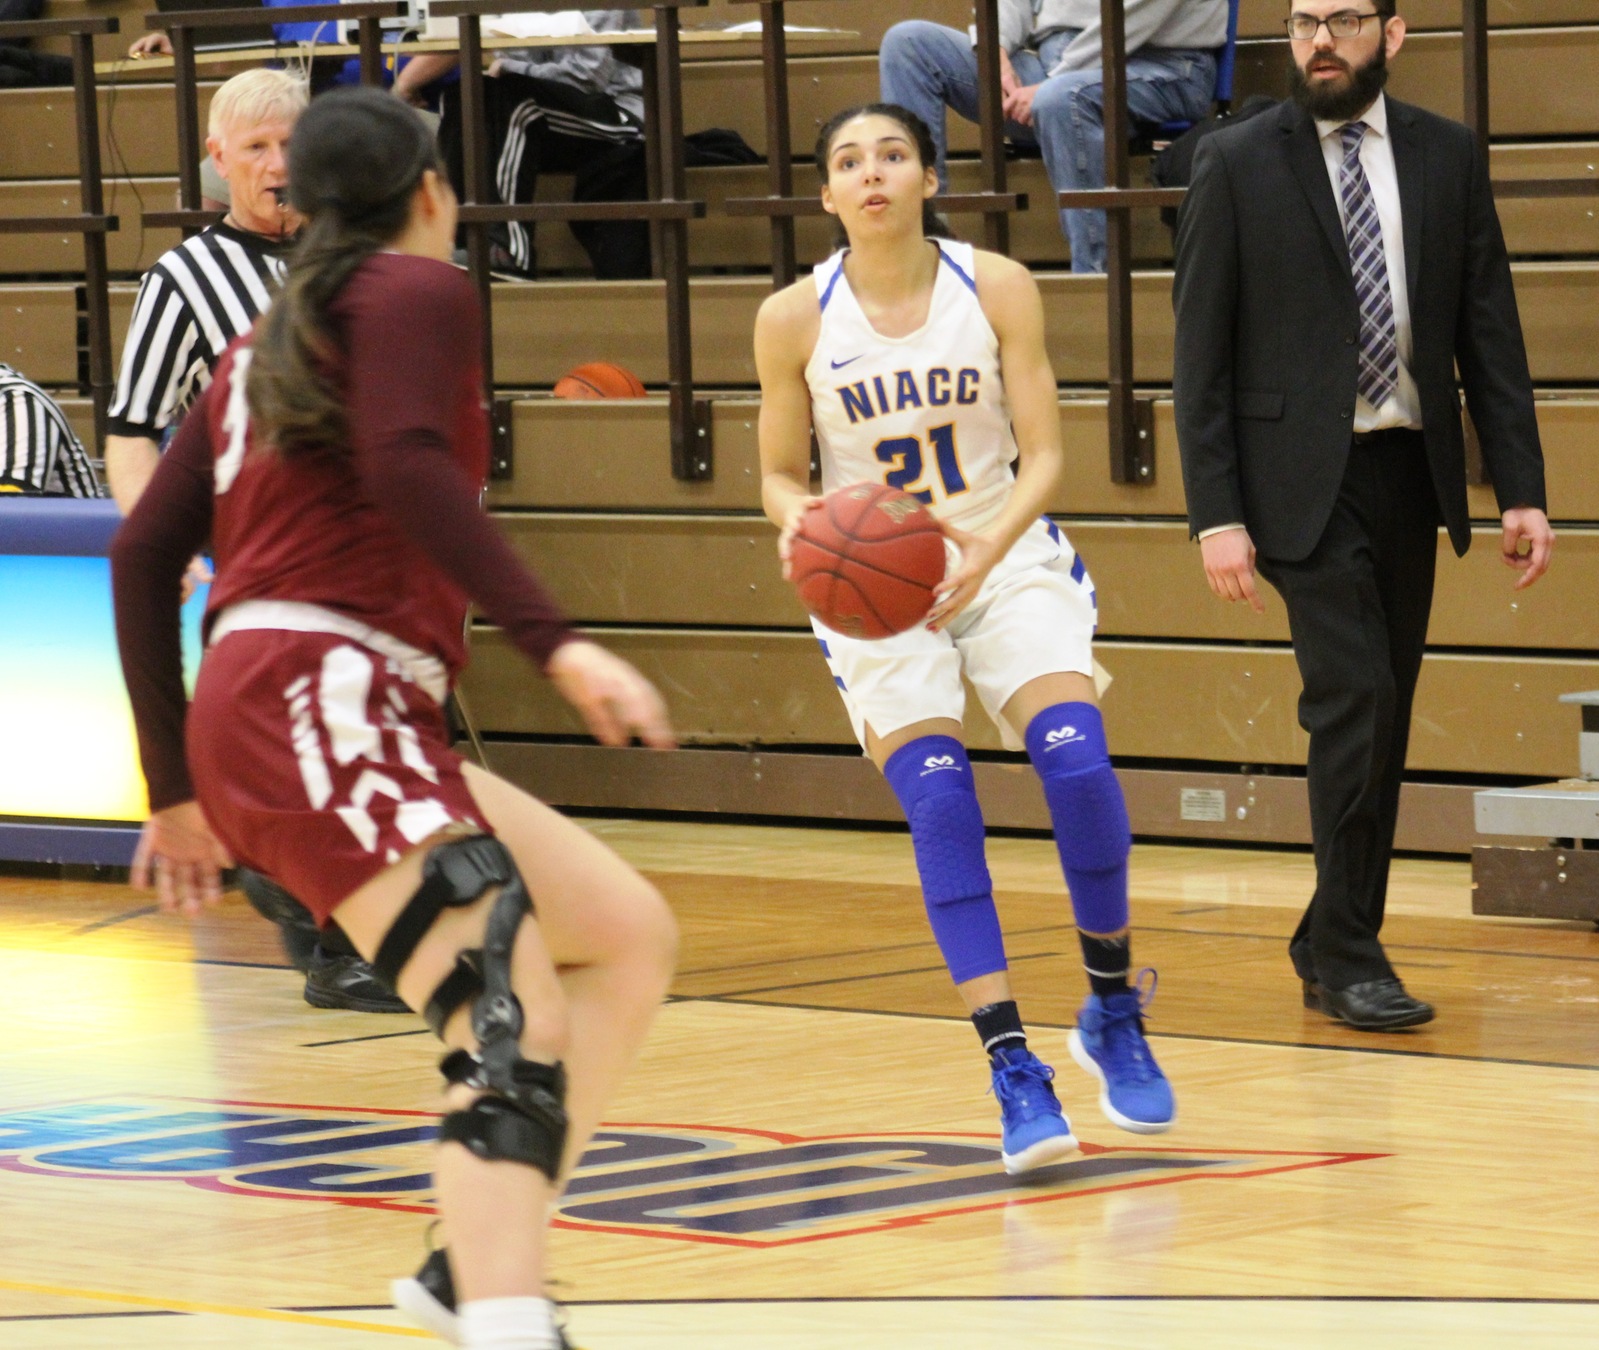 For the second time this season, NIACC's Jada Buford has been selected as the ICCAC player of the week.